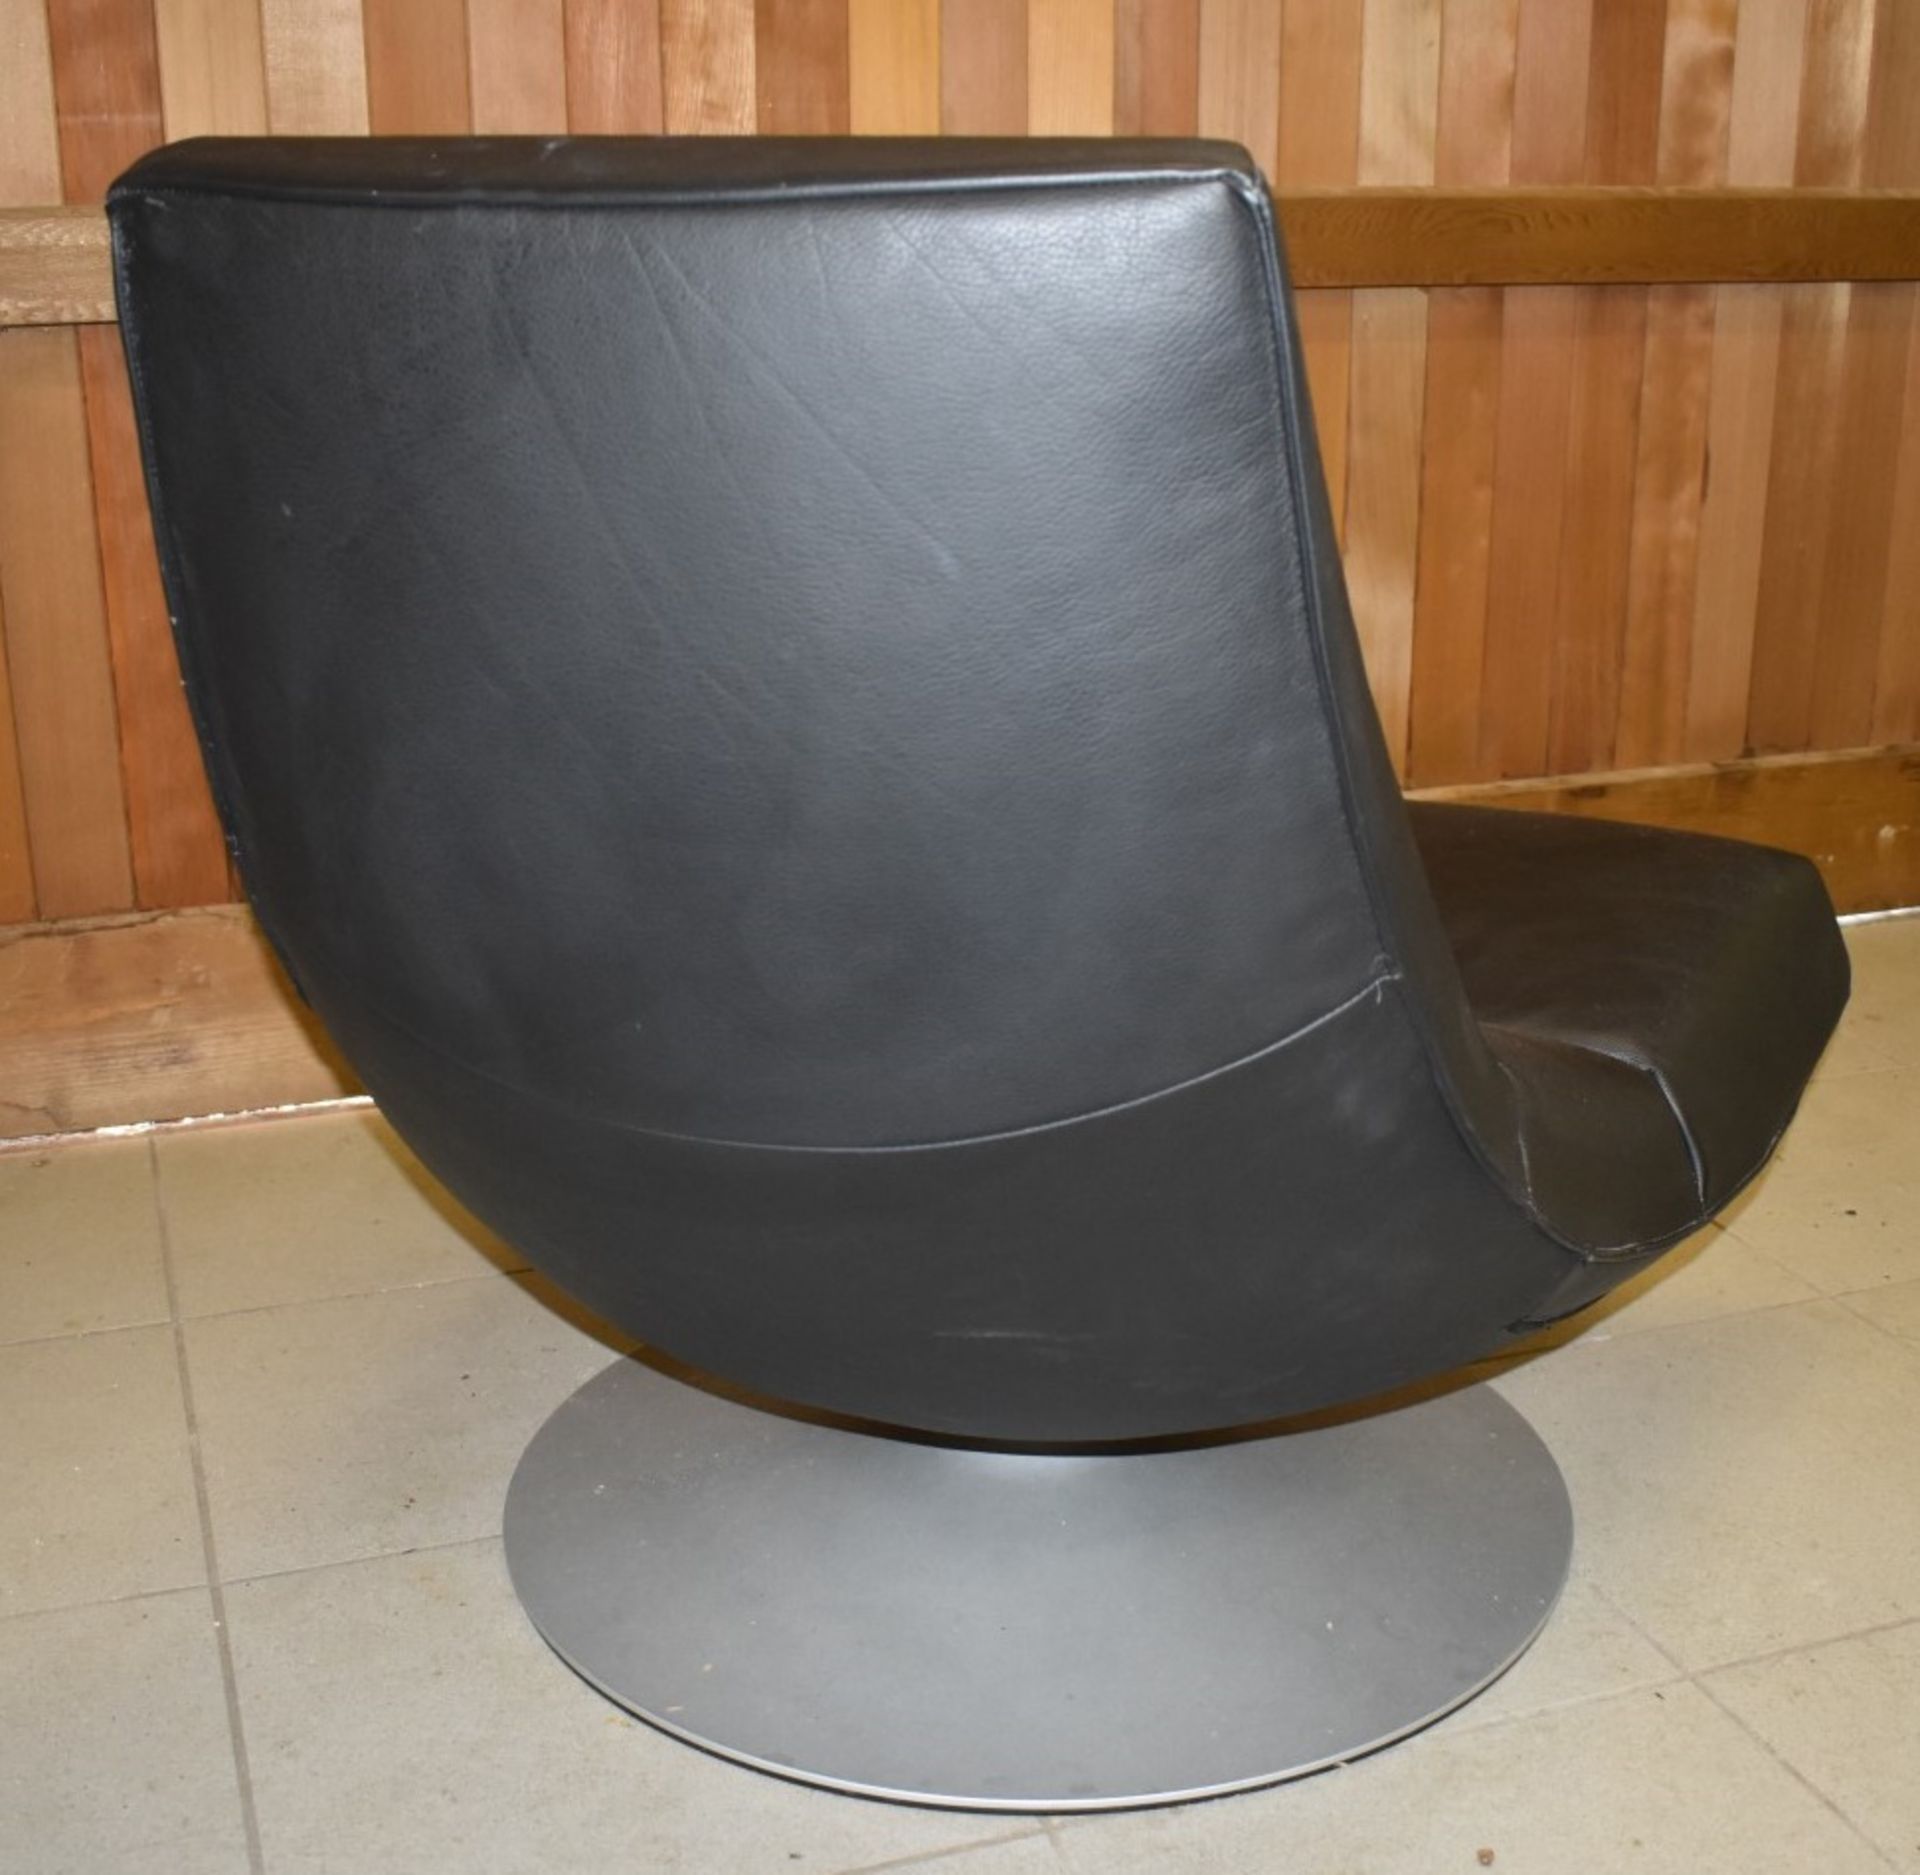 1 x Contemporary Black Leather Swivel Chair With Silver Base - Dimensions: H85/40 x W97 x D100 cms - - Image 2 of 3